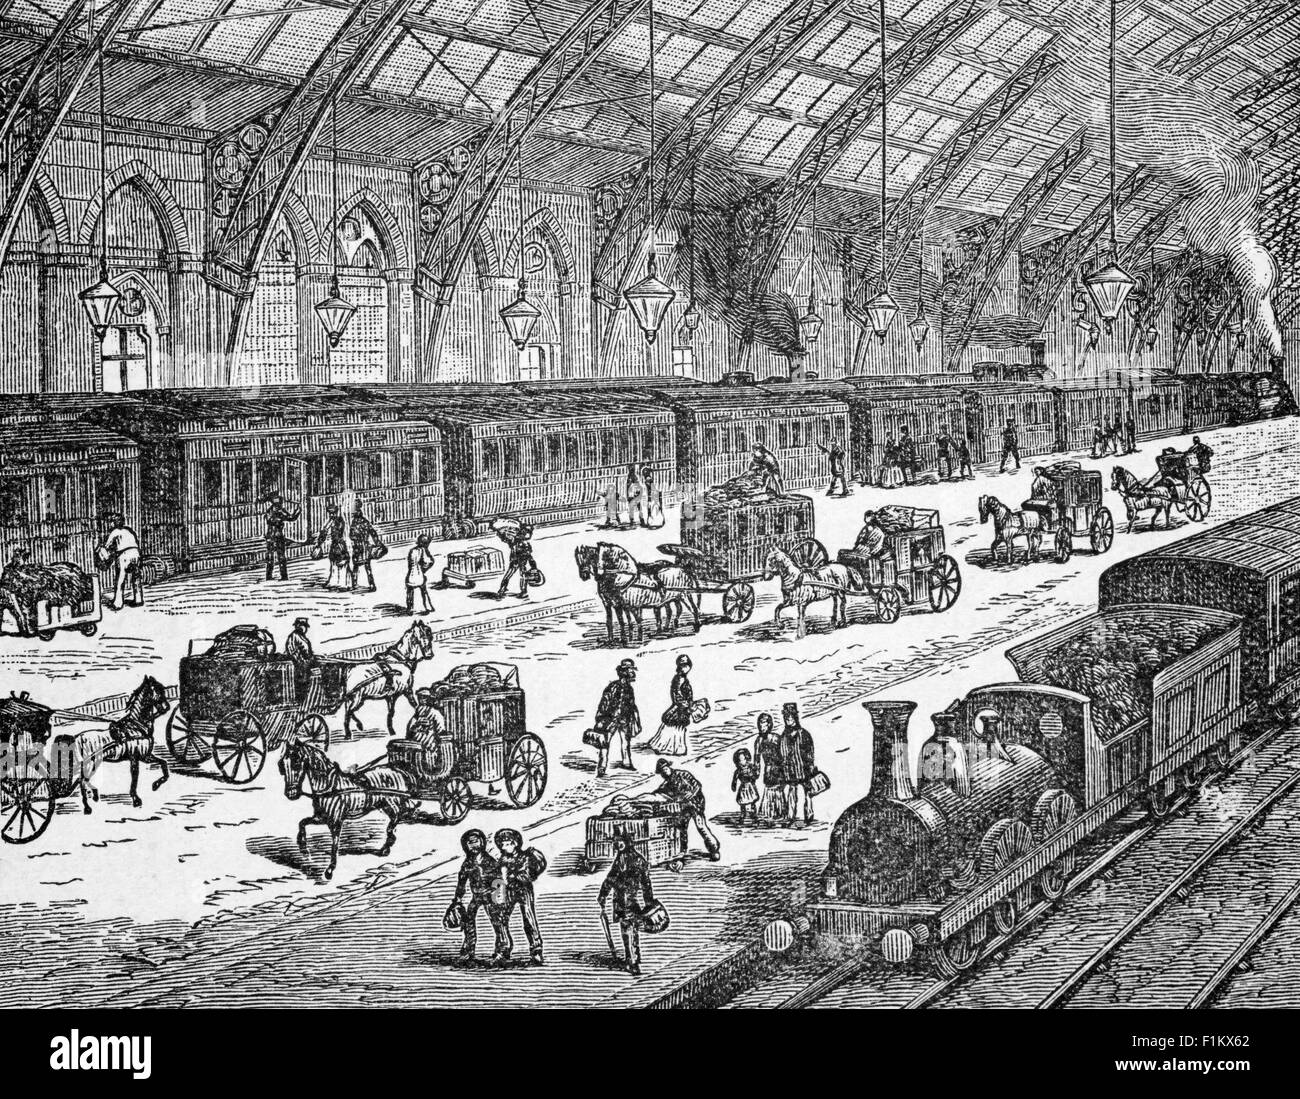 A 19th Century view of an Unknown Railway Station in England with steam locomotives, horses and carriages and hackney carriages. Stock Photo